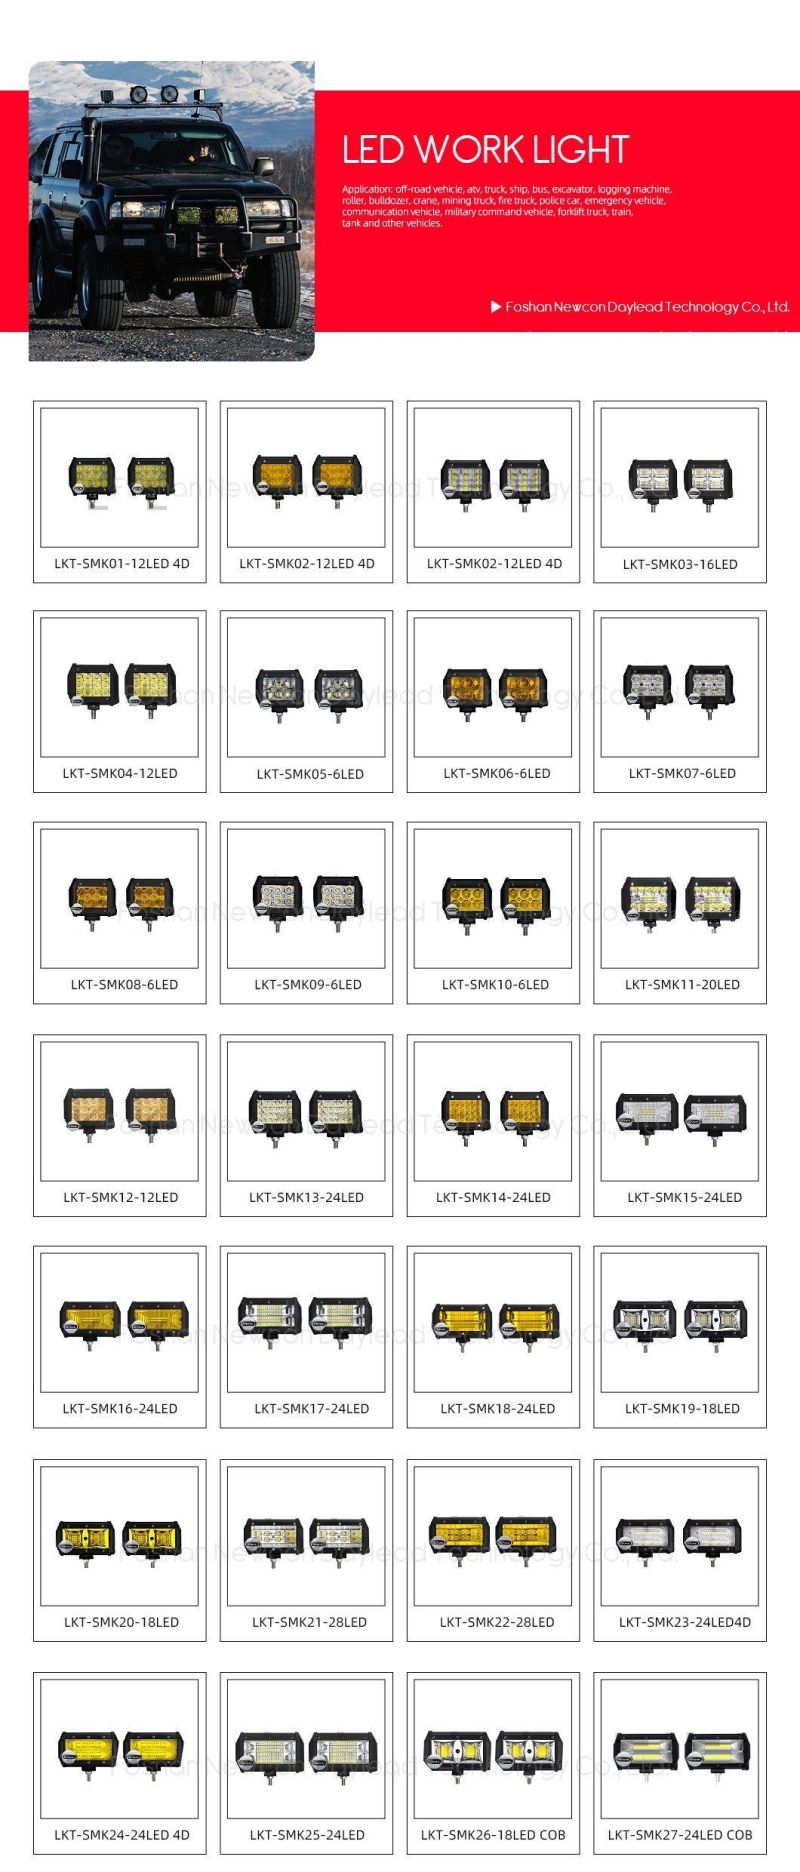 Factor Direct Good Lighting 12V 24W Car Light Accessories Super Bright Suqare Motorcycle Bicycle LED Work Lights